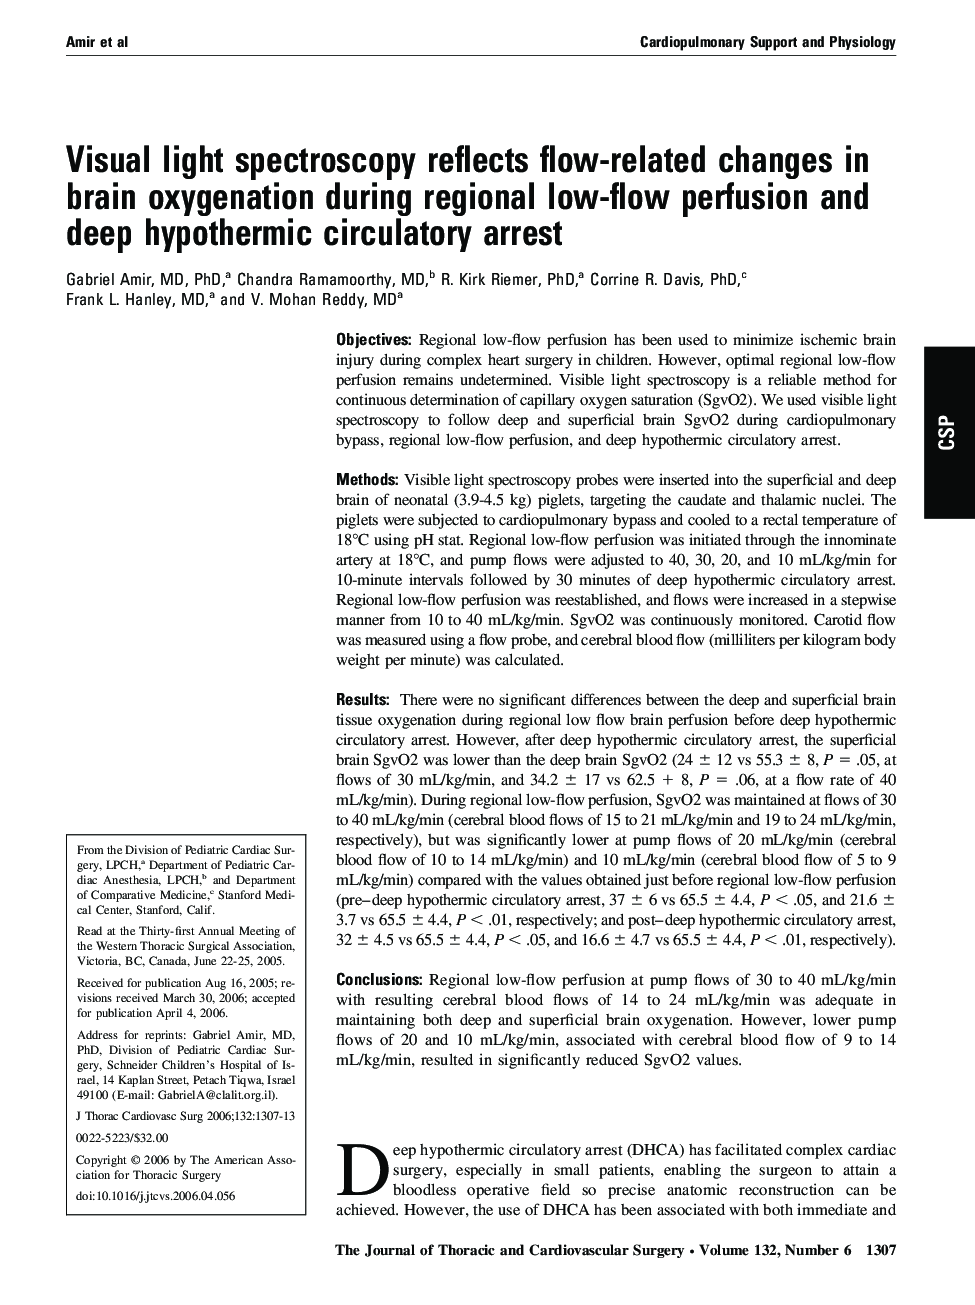 Visual light spectroscopy reflects flow-related changes in brain oxygenation during regional low-flow perfusion and deep hypothermic circulatory arrest